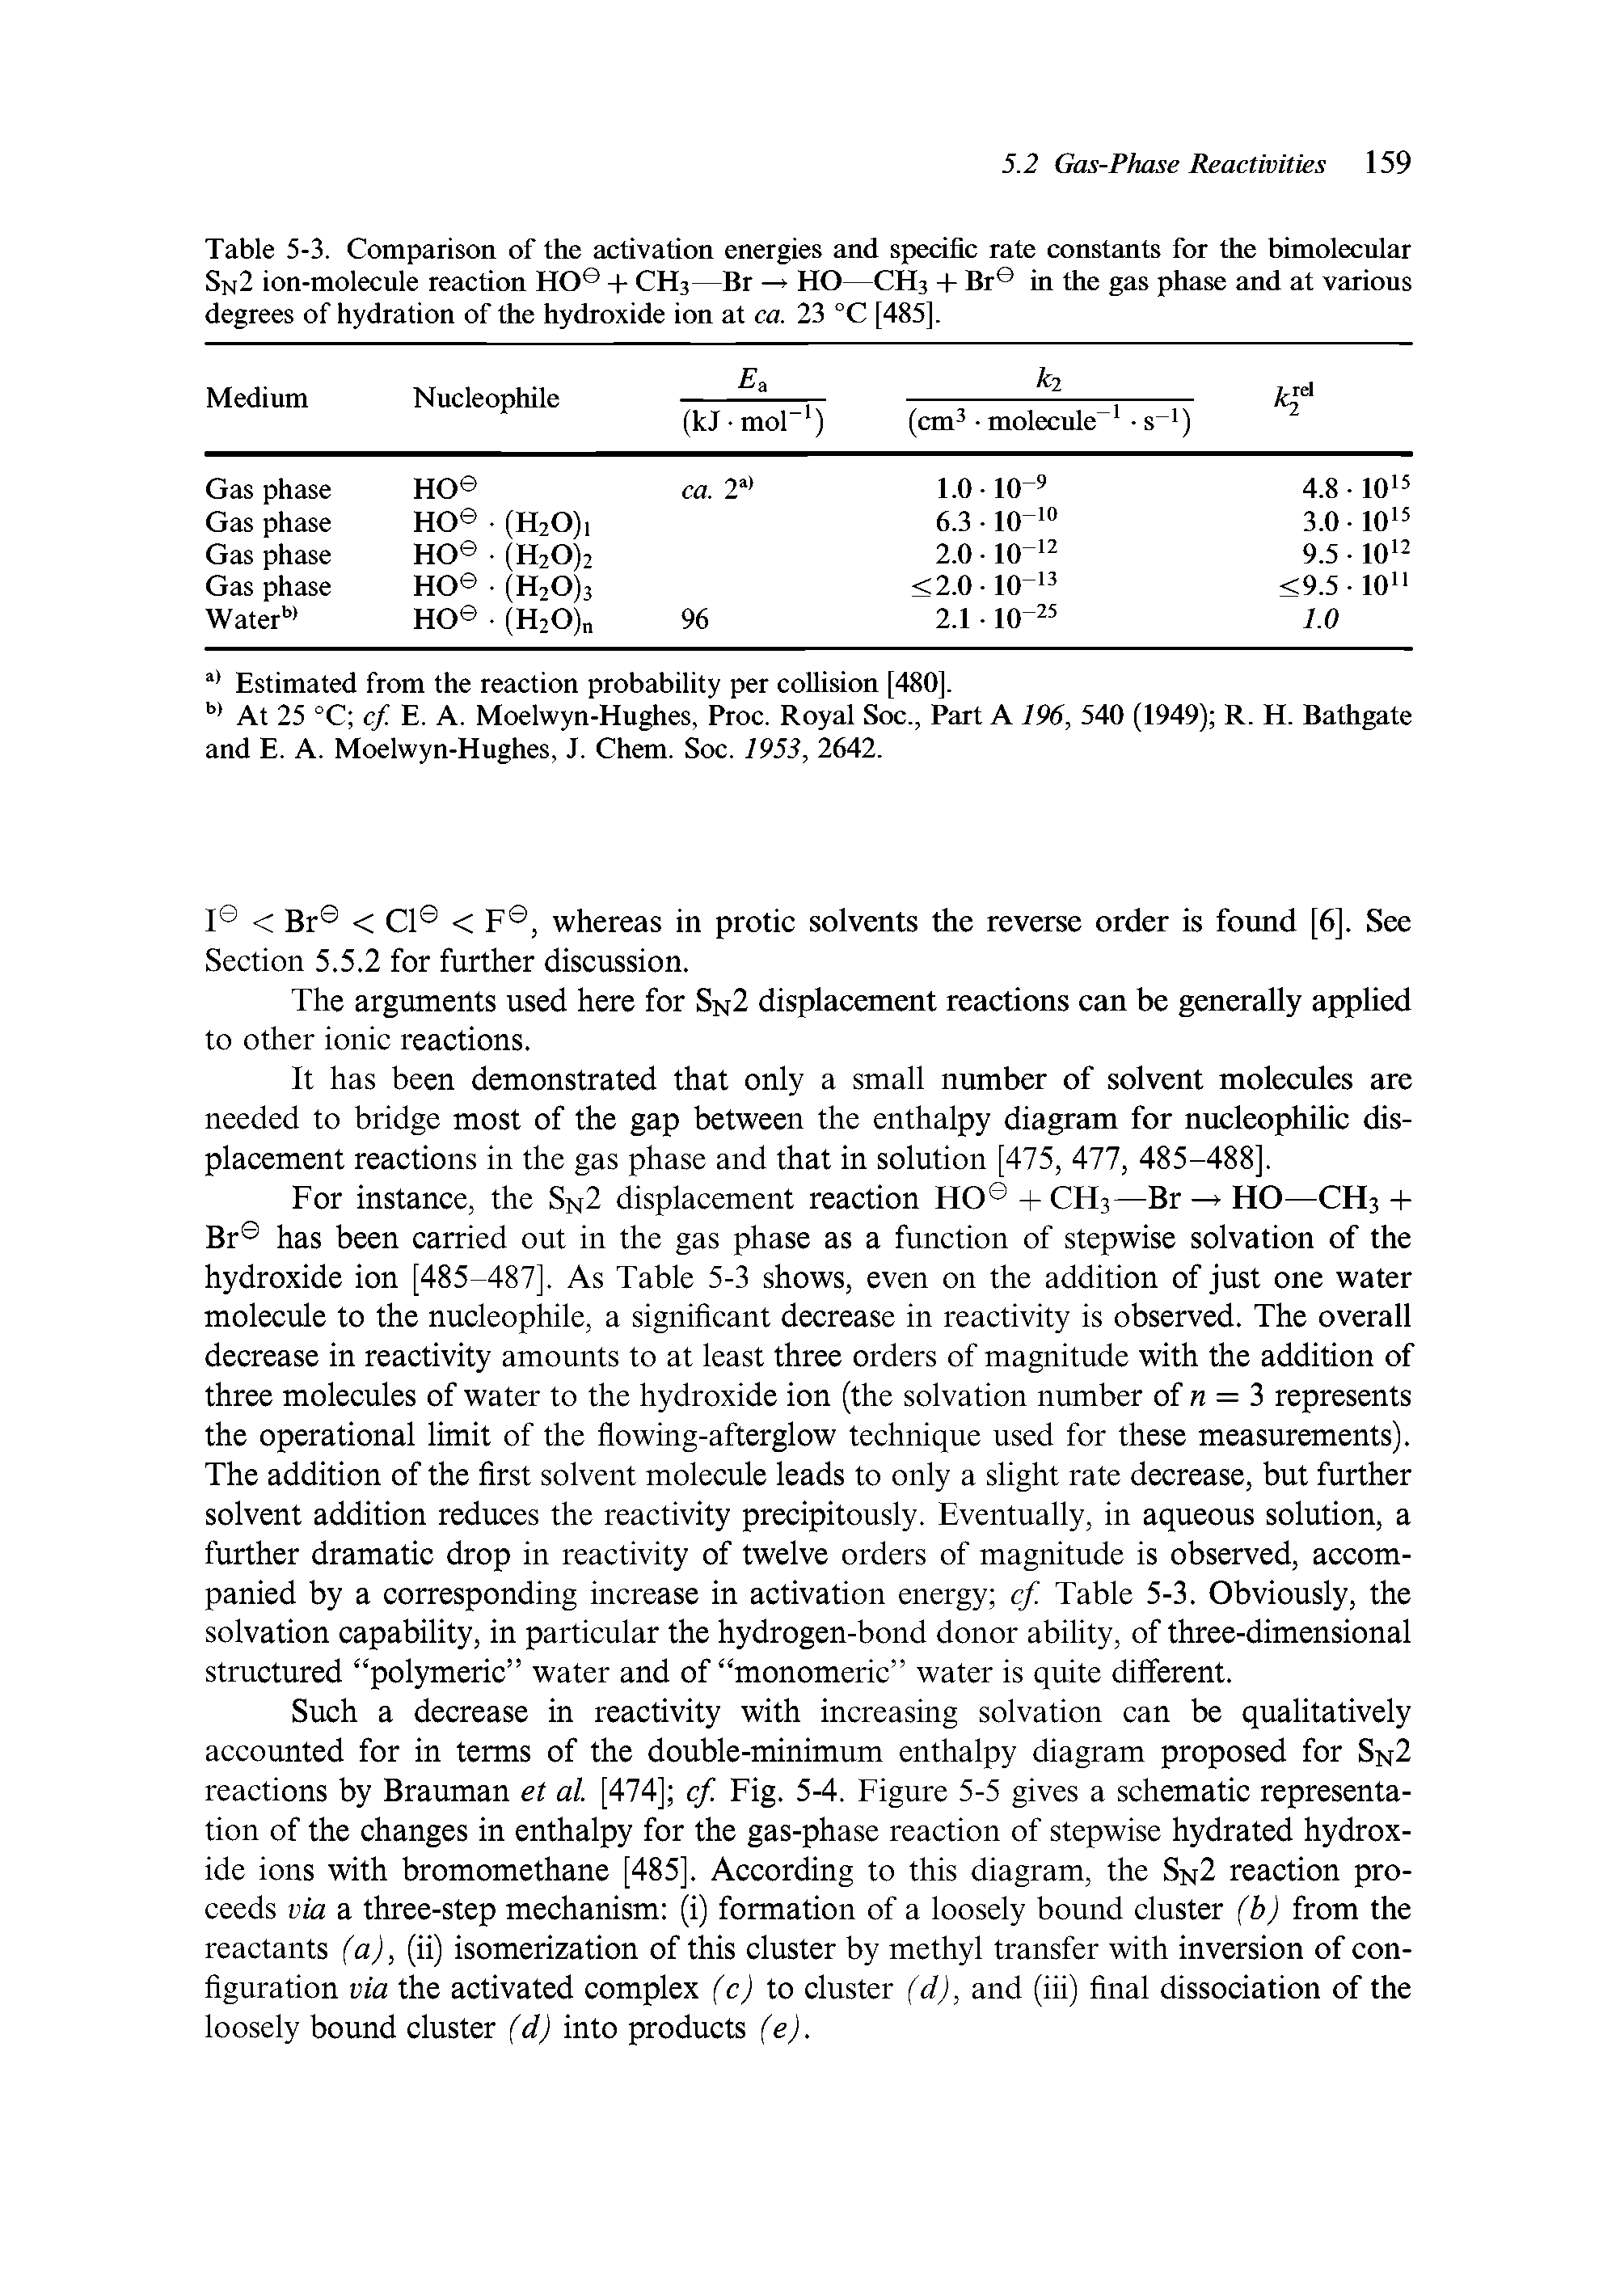 Table 5-3. Comparison of the activation energies and specific rate constants for the bimolecular Sn2 ion-molecule reaction HO -f- CH3—Br — HO—CH3 -f Br in the gas phase and at various degrees of hydration of the hydroxide ion at ca. 23 °C [485],...